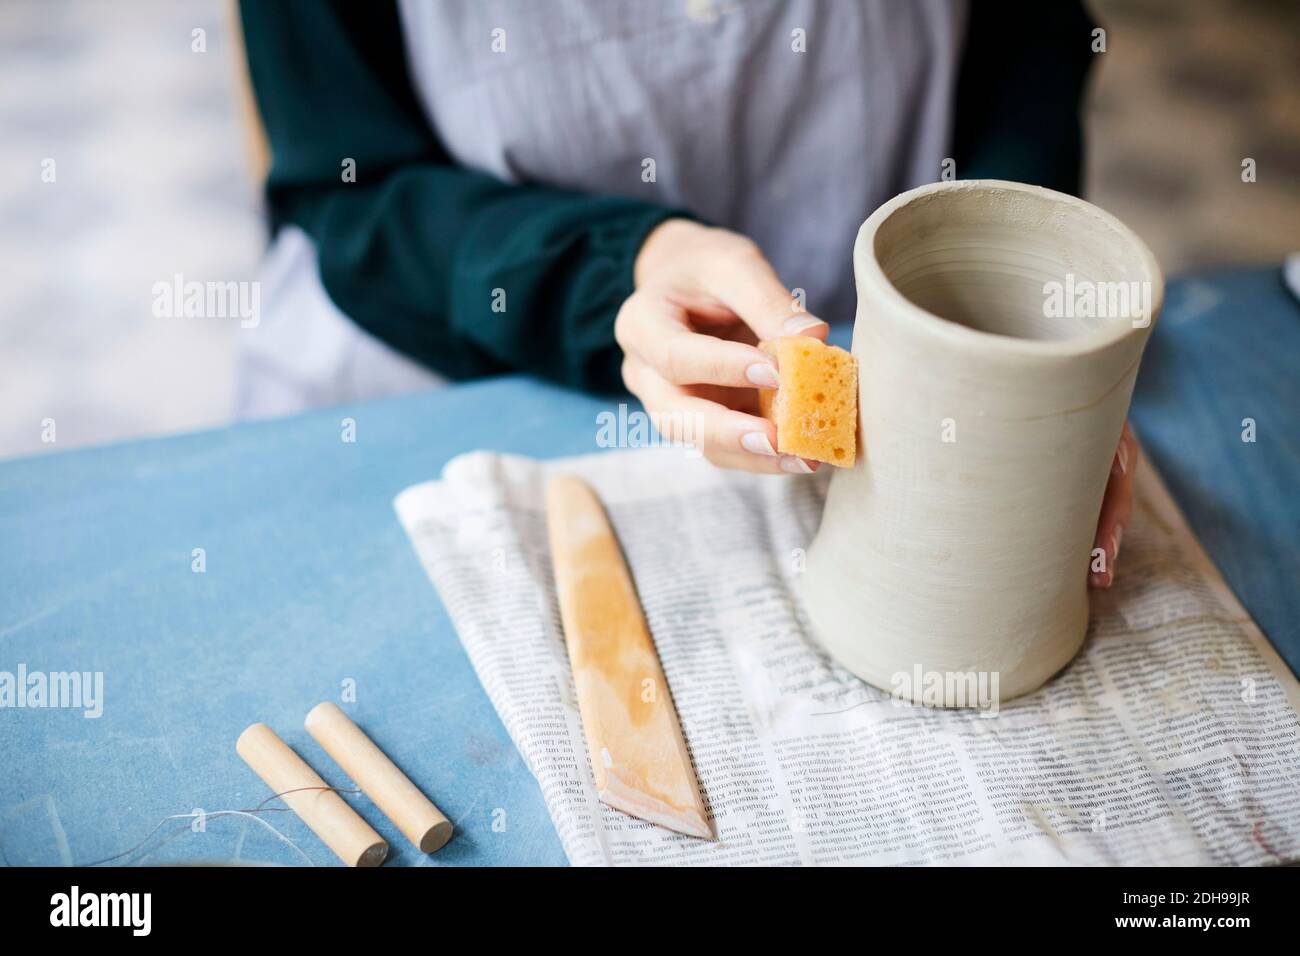 Midsection of young woman molding earthenware at table in art studio Stock Photo